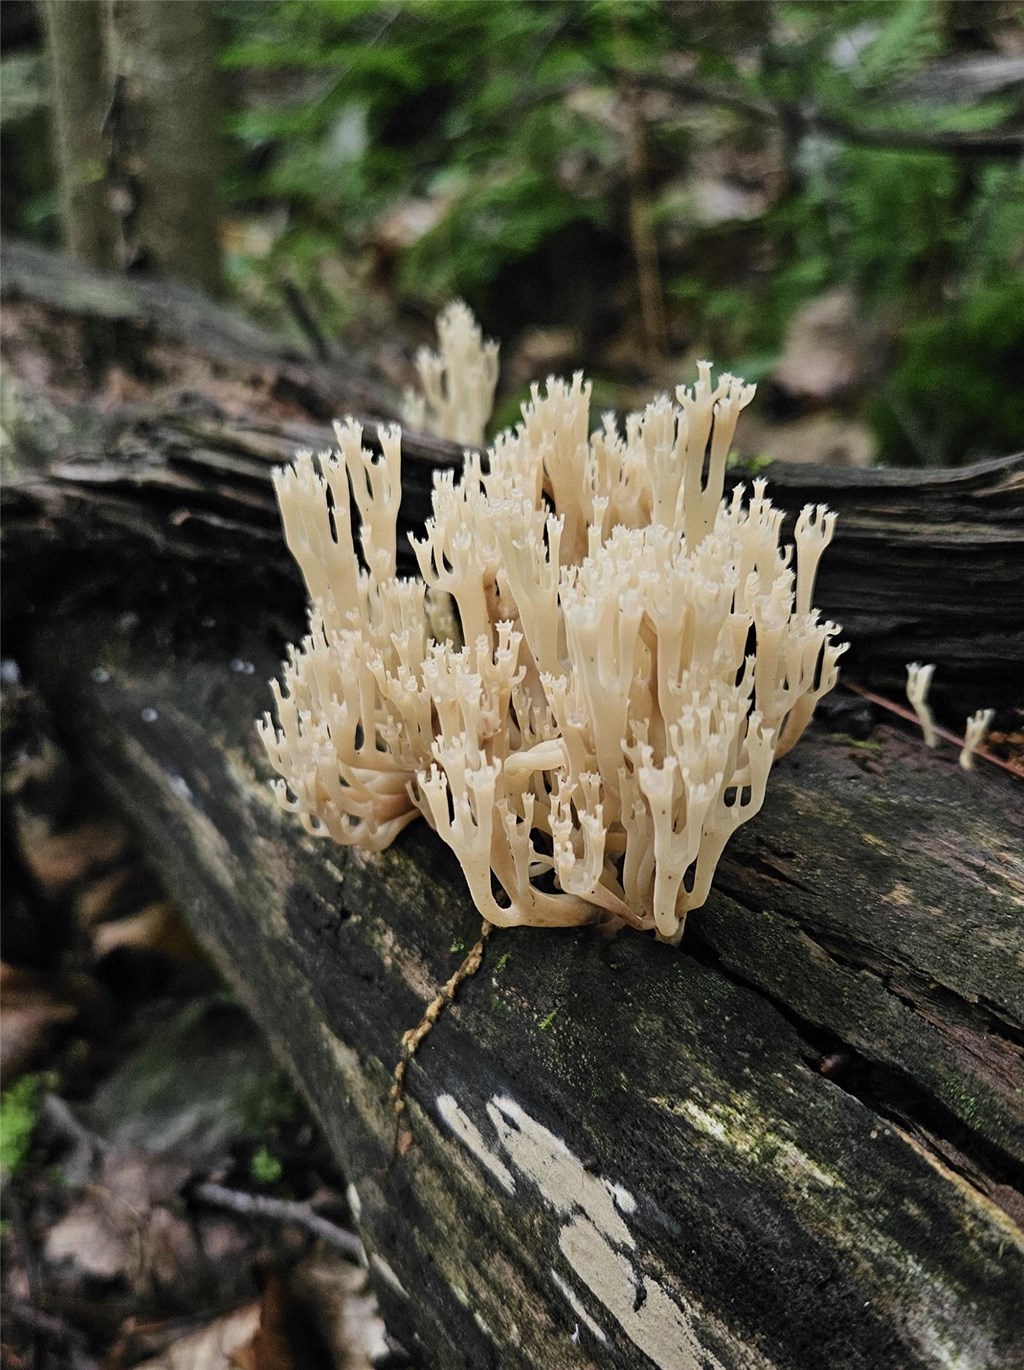 Crown-tipped Coral Fungus Growing on a Log